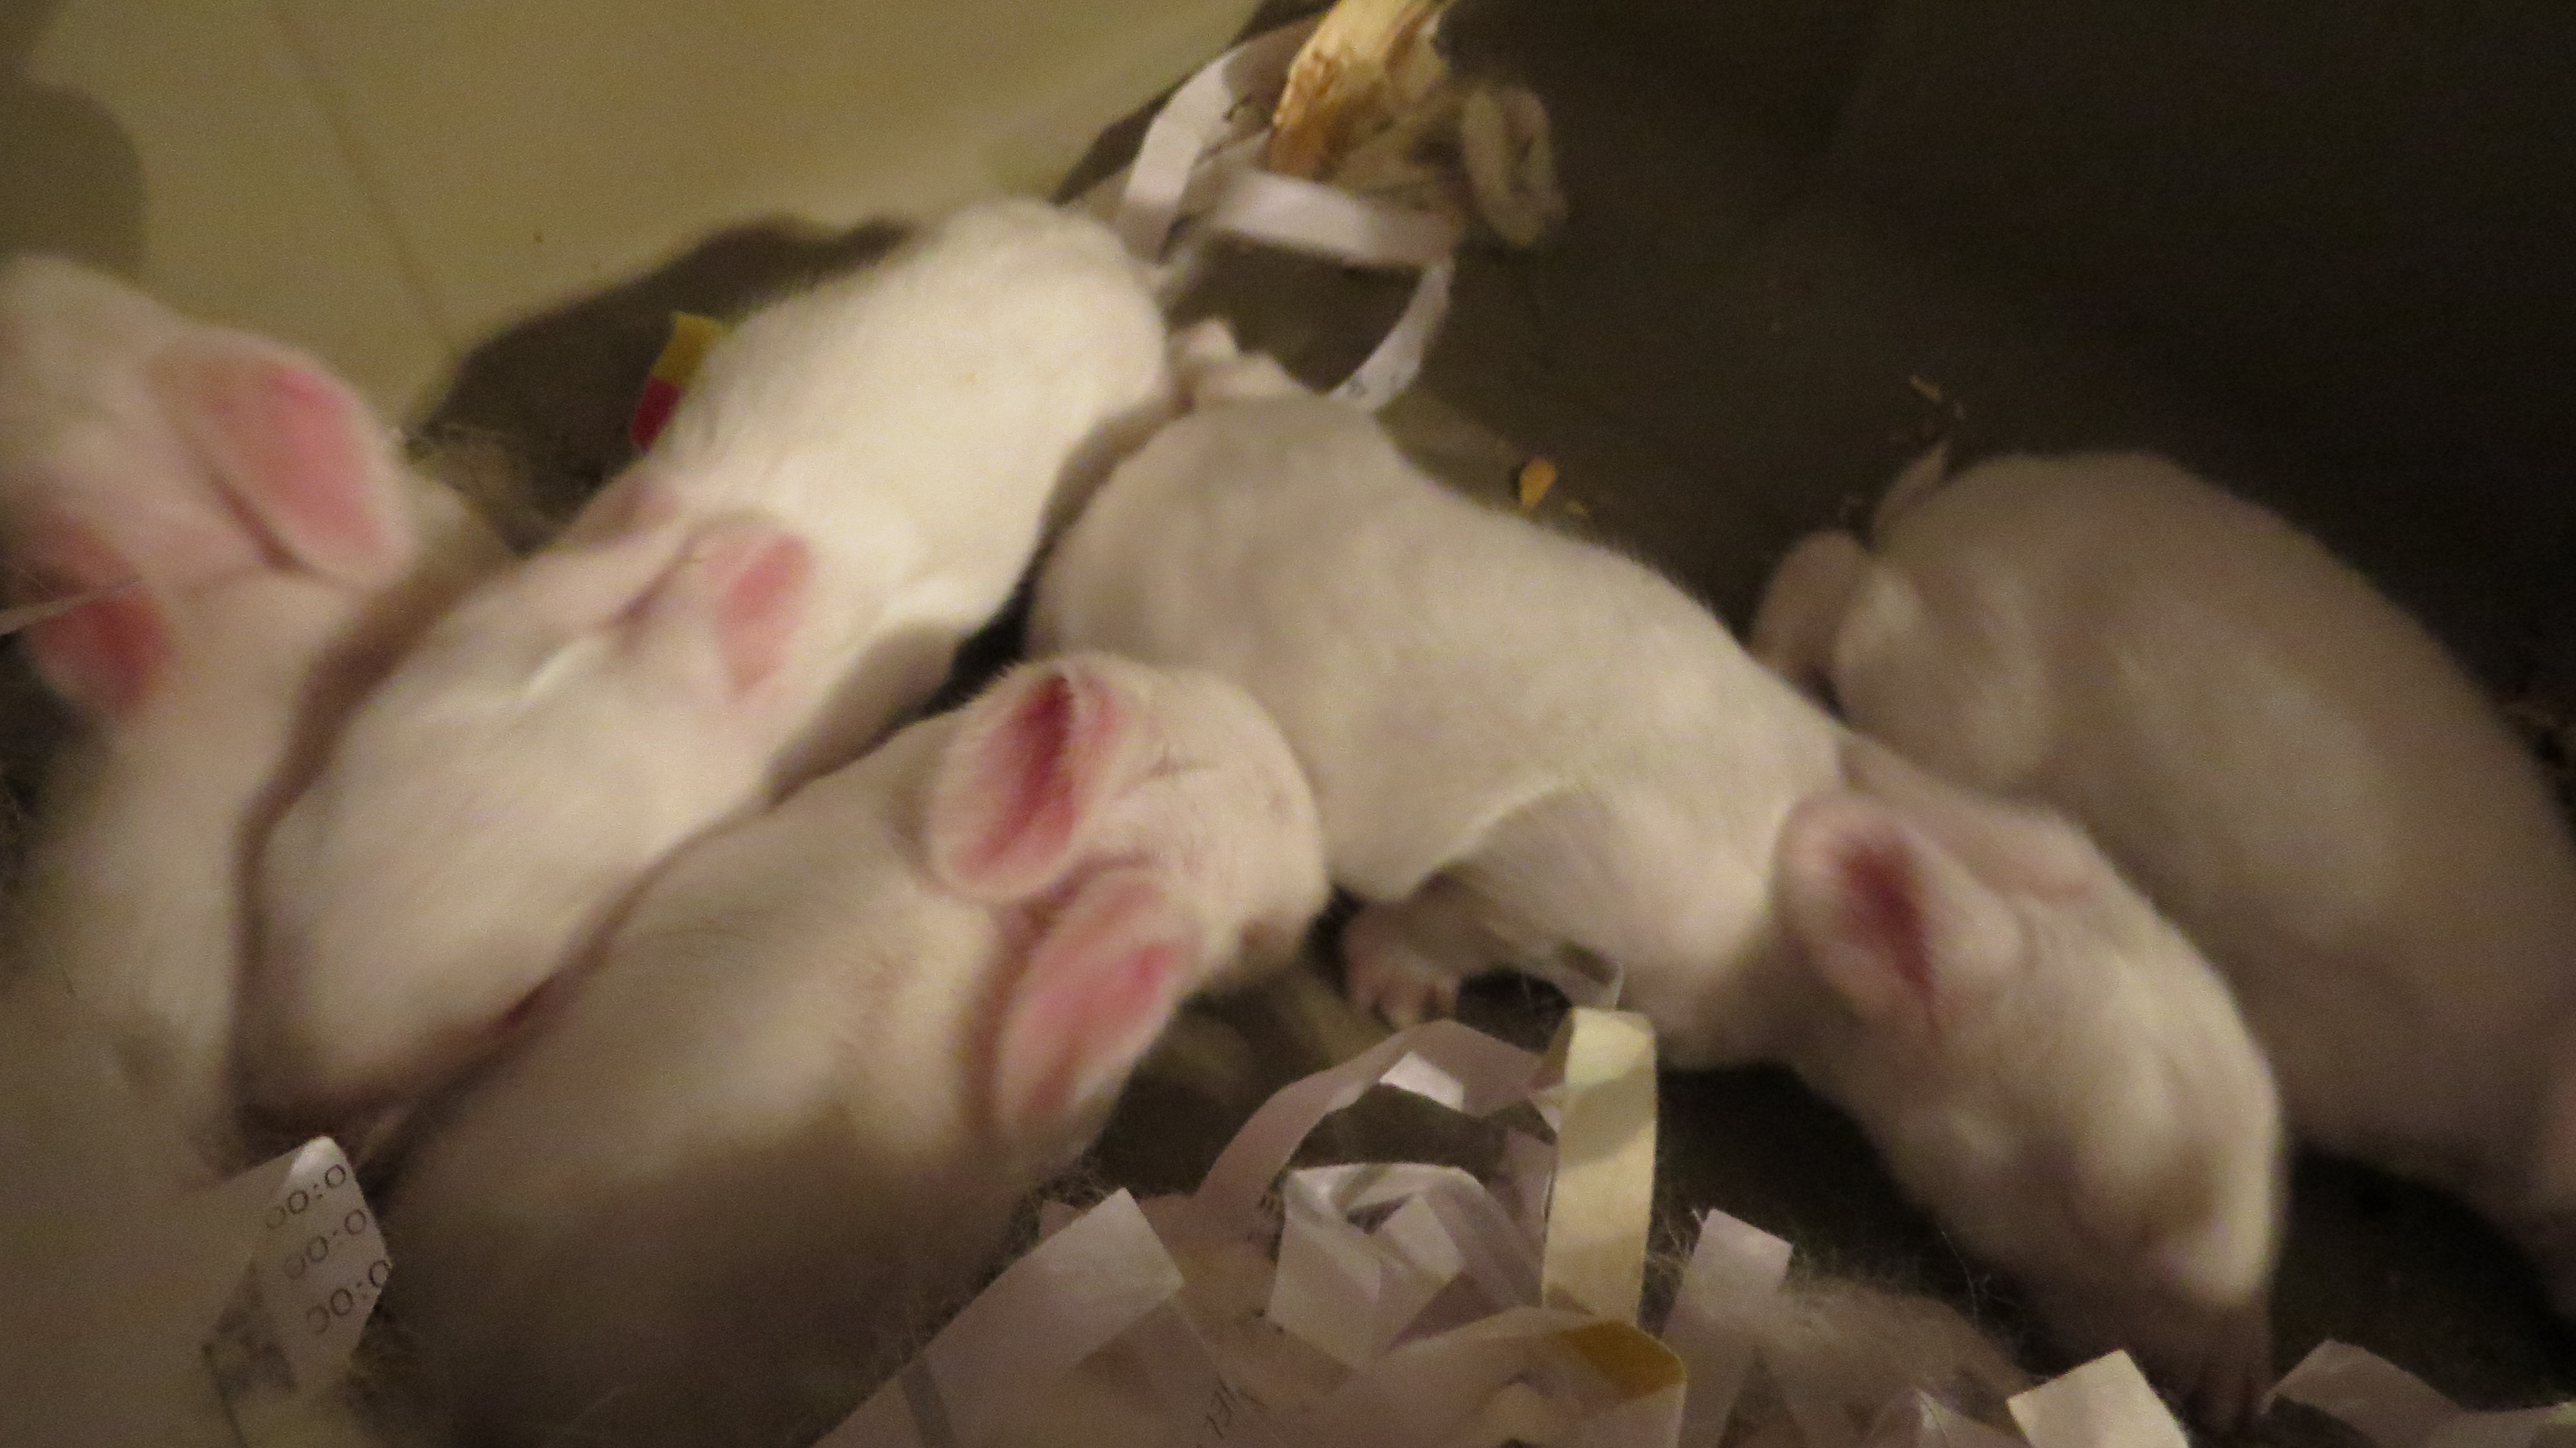 The babies at 2 weeks old.  Their eyes are still closed.